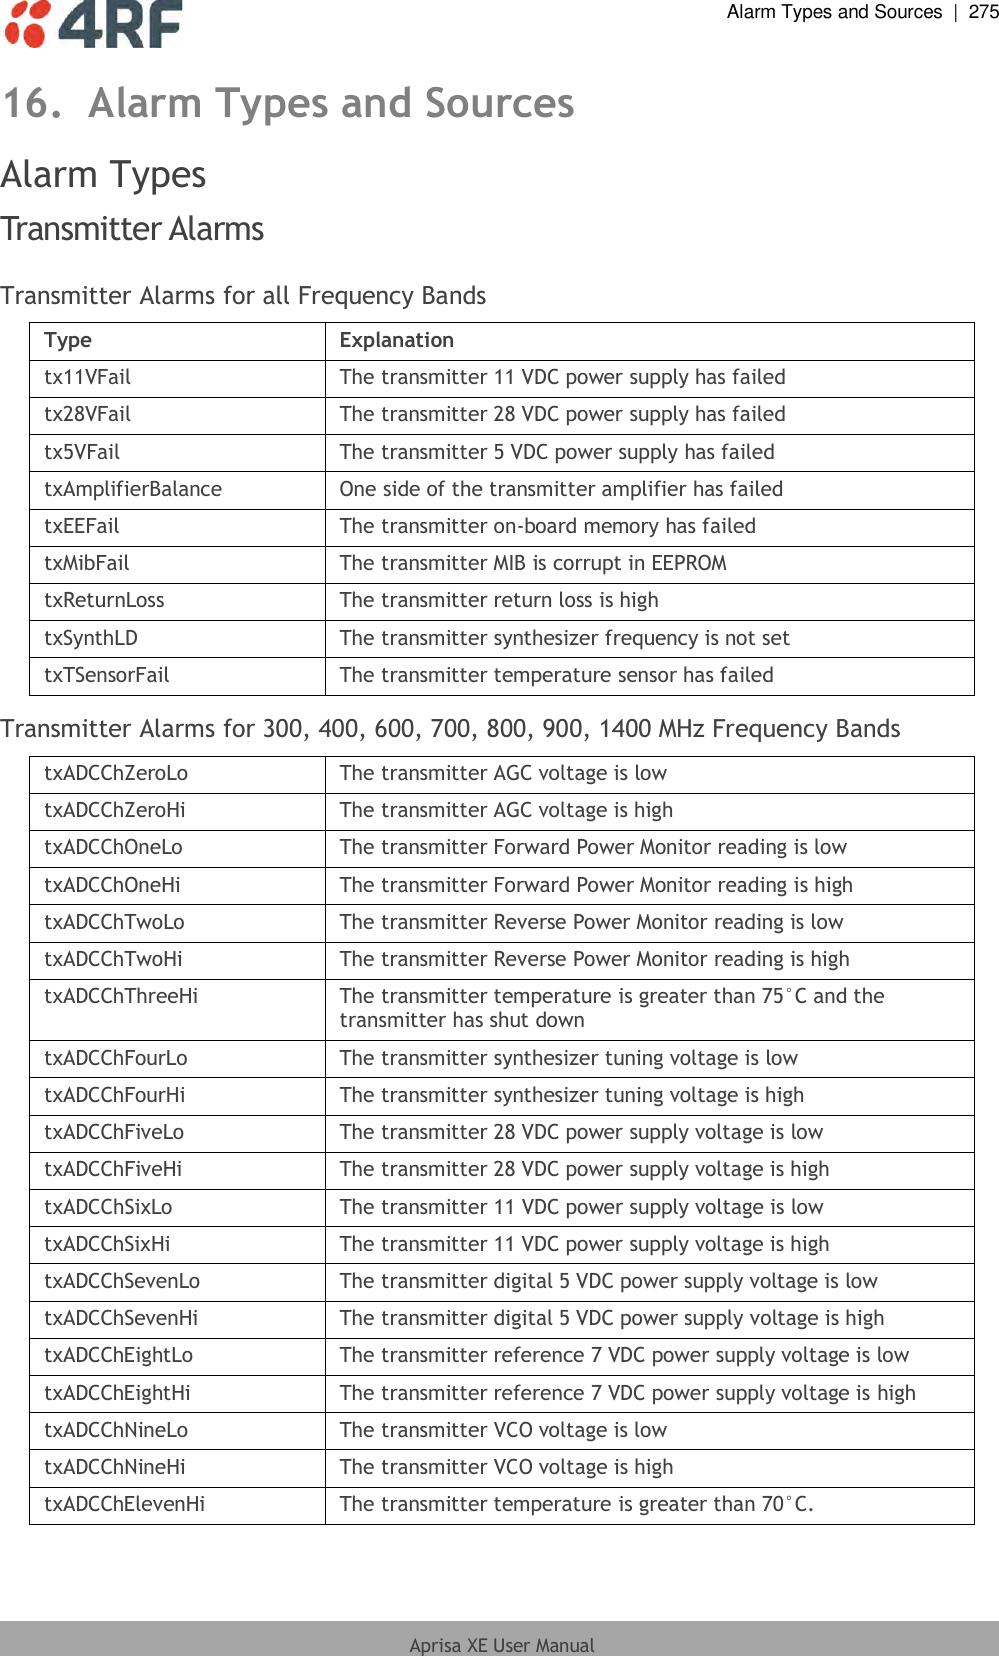  Alarm Types and Sources  |  275  Aprisa XE User Manual  16. Alarm Types and Sources Alarm Types Transmitter Alarms  Transmitter Alarms for all Frequency Bands Type Explanation tx11VFail The transmitter 11 VDC power supply has failed tx28VFail The transmitter 28 VDC power supply has failed tx5VFail The transmitter 5 VDC power supply has failed txAmplifierBalance One side of the transmitter amplifier has failed txEEFail The transmitter on-board memory has failed txMibFail The transmitter MIB is corrupt in EEPROM txReturnLoss The transmitter return loss is high txSynthLD The transmitter synthesizer frequency is not set txTSensorFail The transmitter temperature sensor has failed  Transmitter Alarms for 300, 400, 600, 700, 800, 900, 1400 MHz Frequency Bands txADCChZeroLo The transmitter AGC voltage is low txADCChZeroHi The transmitter AGC voltage is high txADCChOneLo The transmitter Forward Power Monitor reading is low txADCChOneHi The transmitter Forward Power Monitor reading is high txADCChTwoLo The transmitter Reverse Power Monitor reading is low txADCChTwoHi The transmitter Reverse Power Monitor reading is high txADCChThreeHi The transmitter temperature is greater than 75°C and the transmitter has shut down txADCChFourLo The transmitter synthesizer tuning voltage is low txADCChFourHi The transmitter synthesizer tuning voltage is high txADCChFiveLo The transmitter 28 VDC power supply voltage is low txADCChFiveHi The transmitter 28 VDC power supply voltage is high txADCChSixLo The transmitter 11 VDC power supply voltage is low txADCChSixHi The transmitter 11 VDC power supply voltage is high txADCChSevenLo The transmitter digital 5 VDC power supply voltage is low txADCChSevenHi The transmitter digital 5 VDC power supply voltage is high txADCChEightLo The transmitter reference 7 VDC power supply voltage is low txADCChEightHi The transmitter reference 7 VDC power supply voltage is high txADCChNineLo The transmitter VCO voltage is low txADCChNineHi The transmitter VCO voltage is high txADCChElevenHi The transmitter temperature is greater than 70°C.  